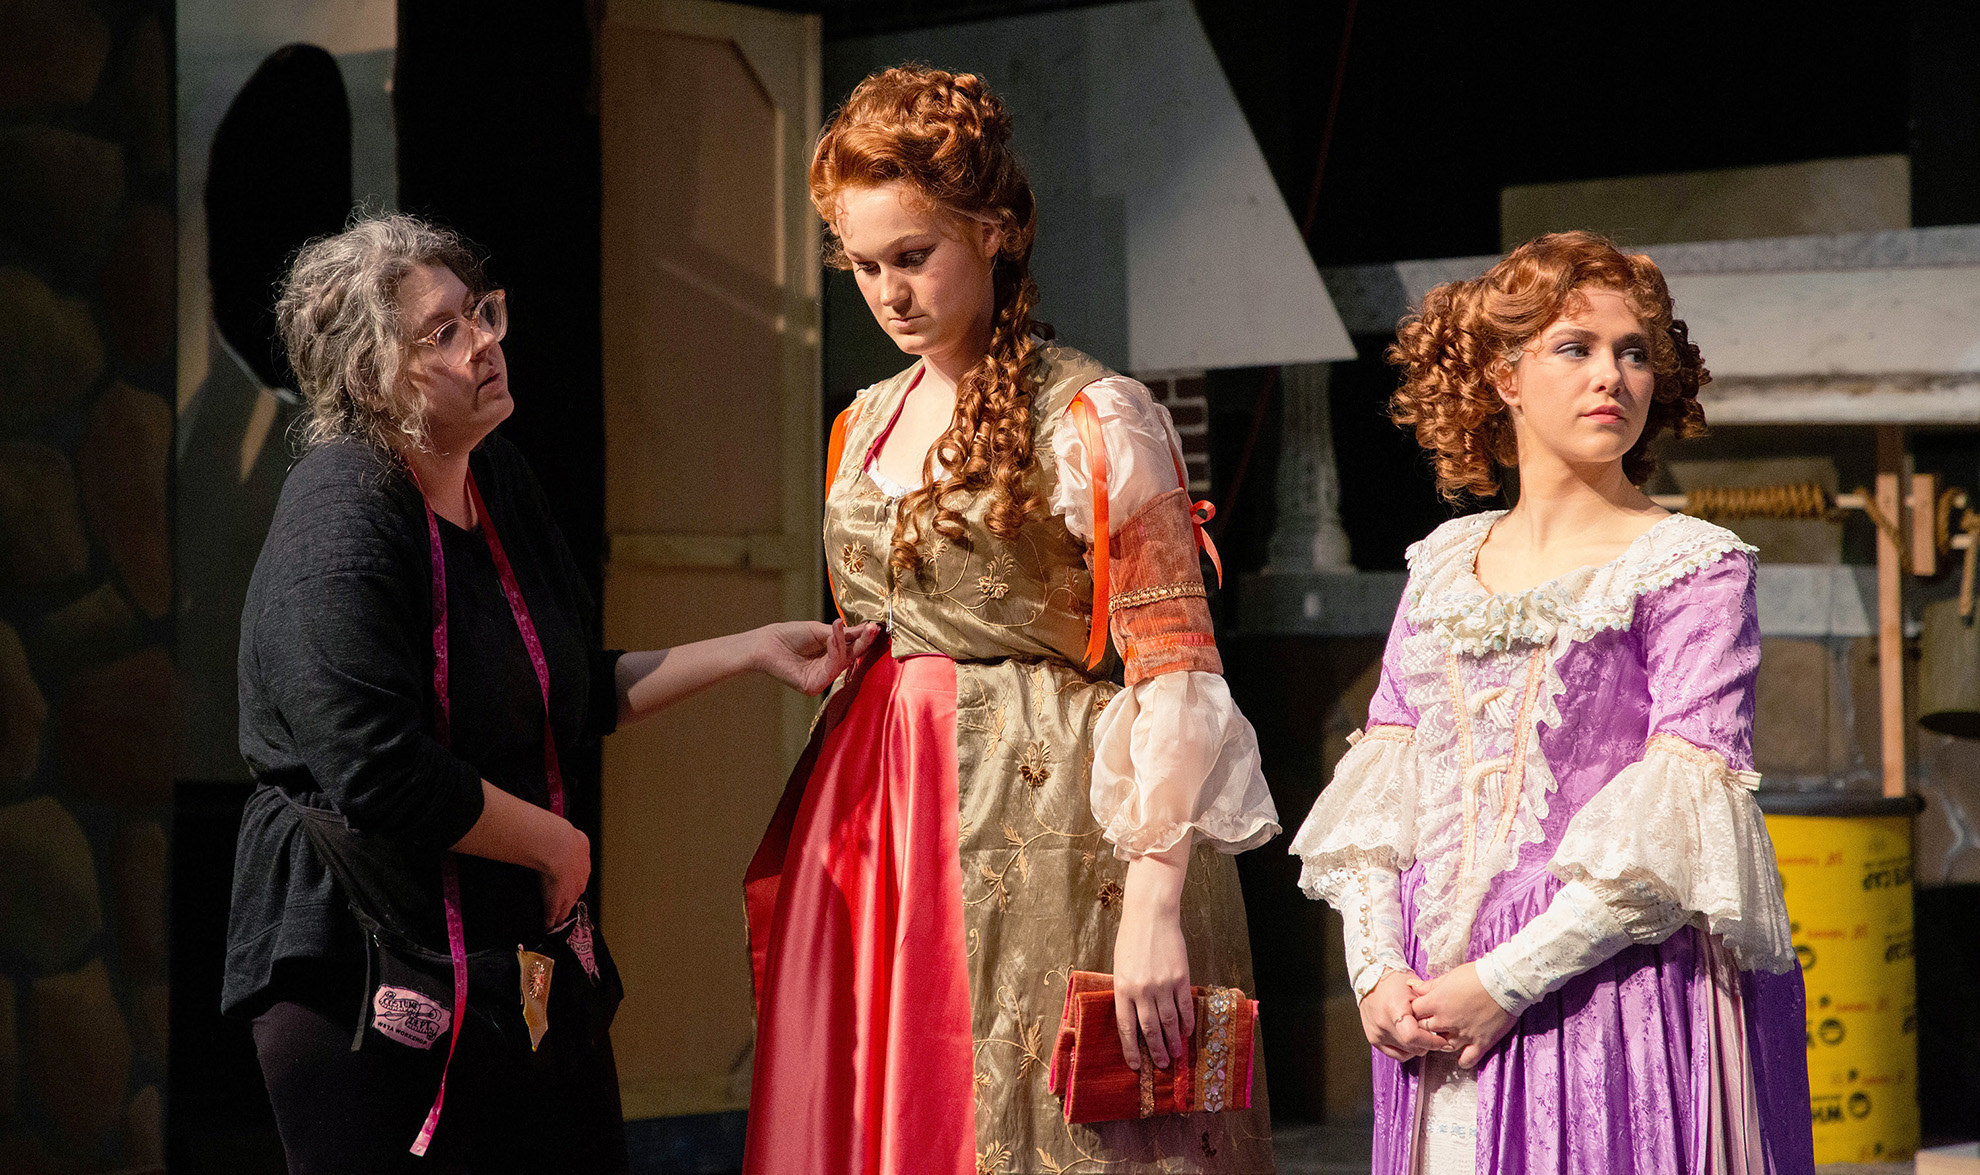 The theatre program at California Baptist University has been                       busy preparing for the magic of “Cinderella” — both on stage and behind the                       scenes. The production of the Broadway adaptation of the classic musical opens                       March 31.